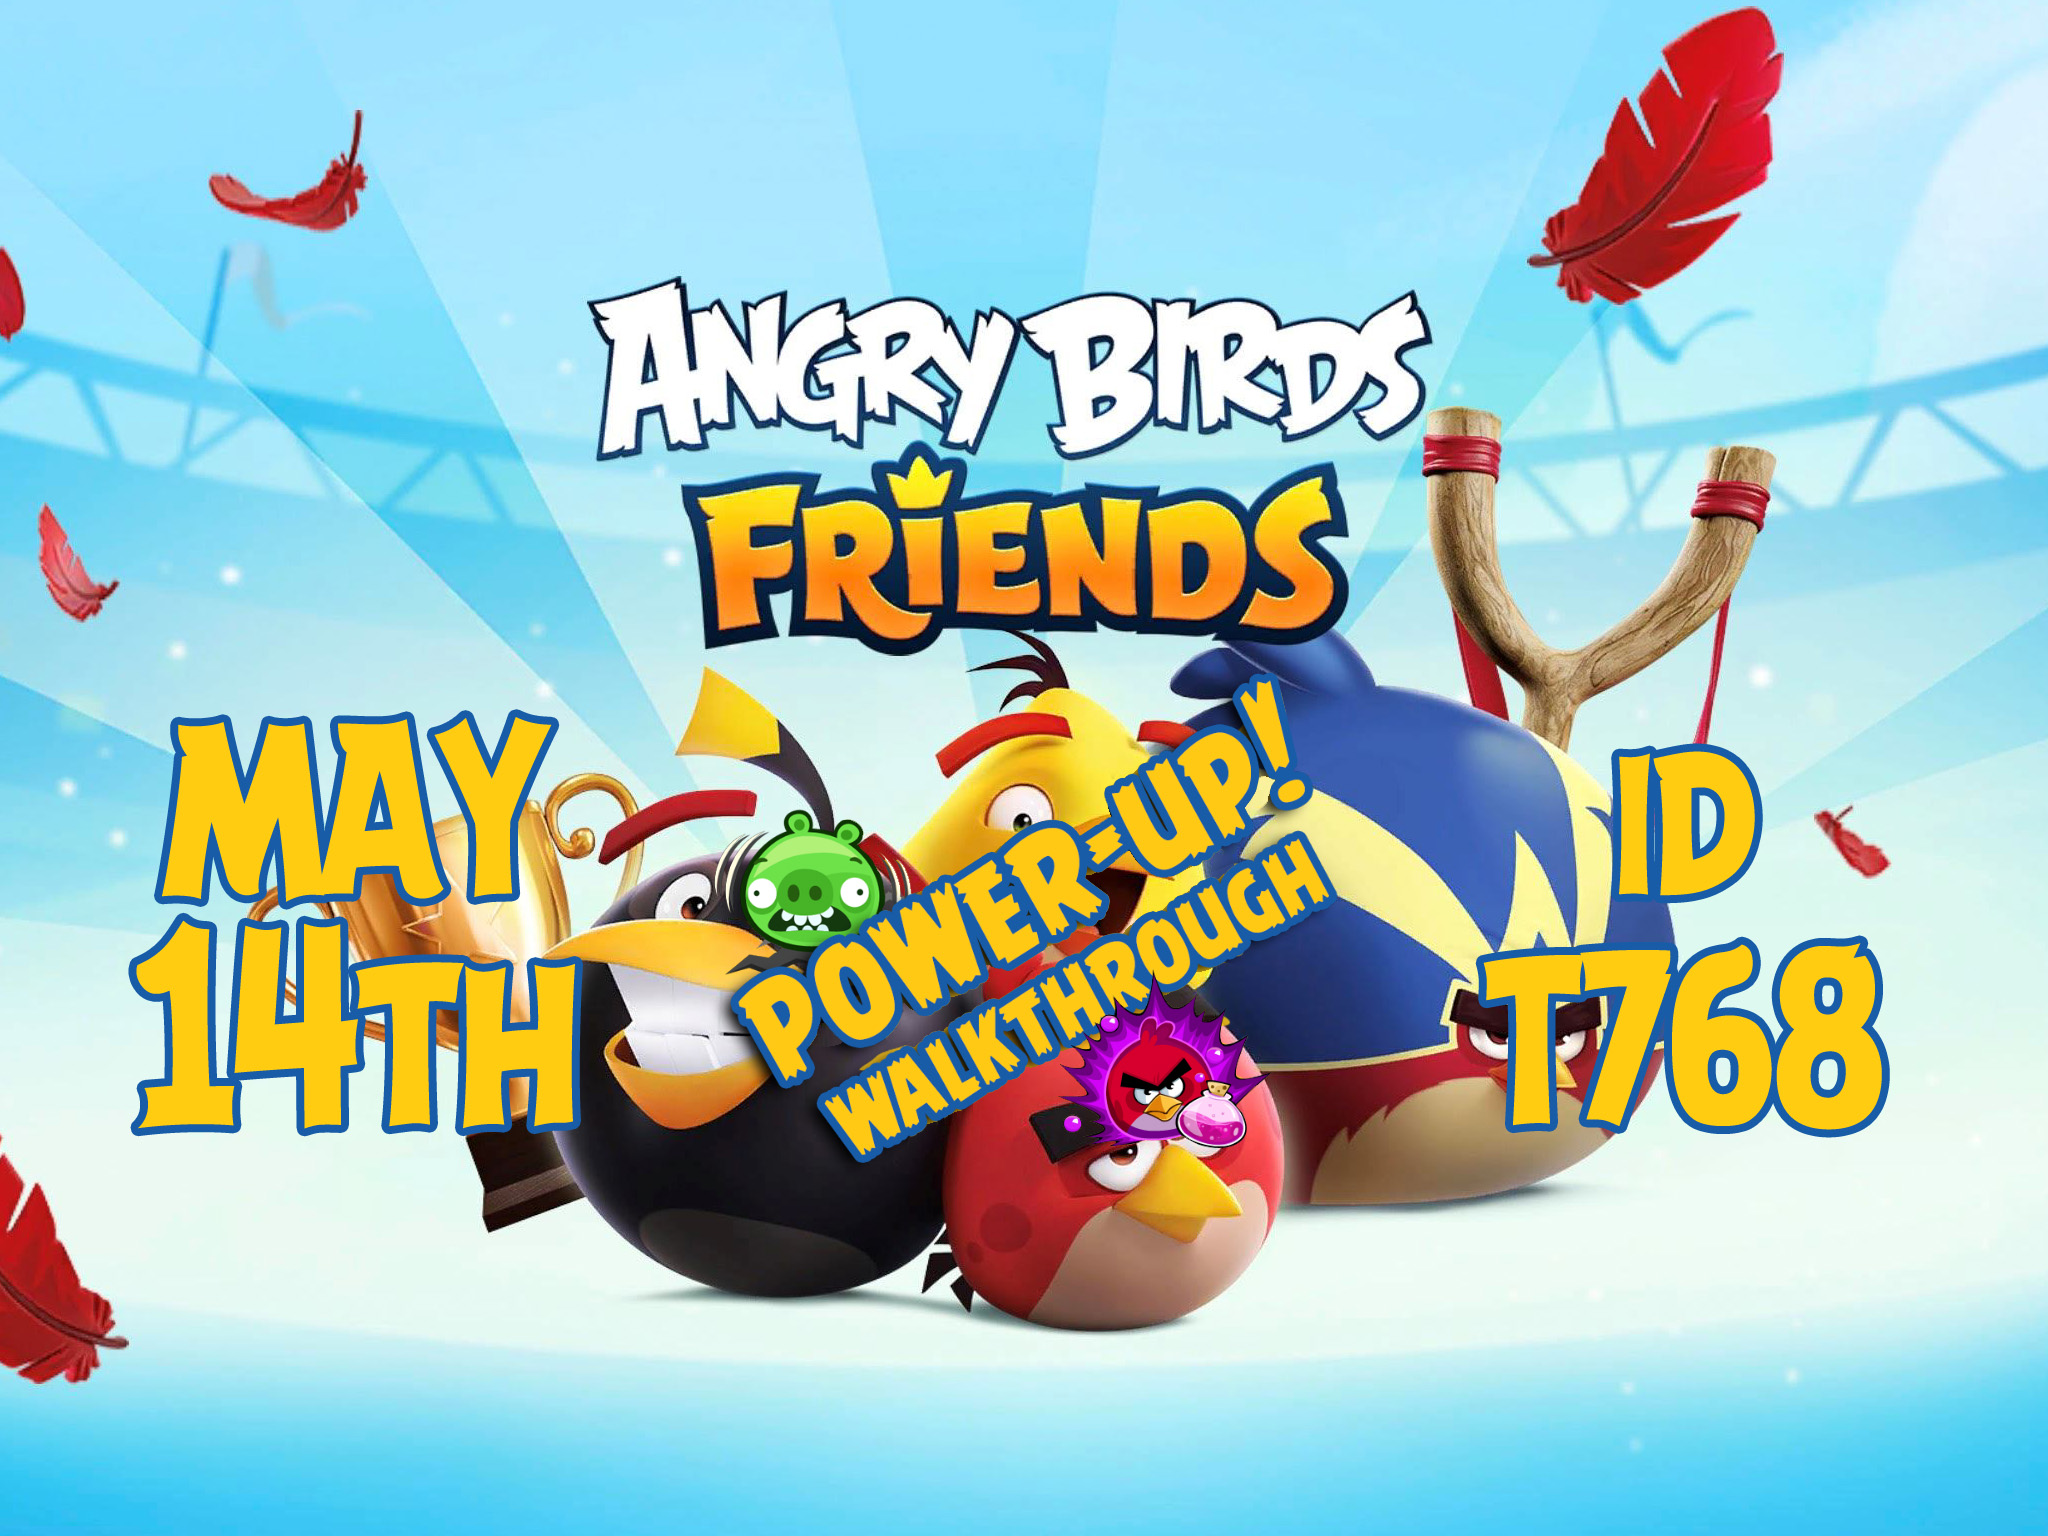 Angry-Birds-Friends-Tournament-T768-Feature-Image-PU